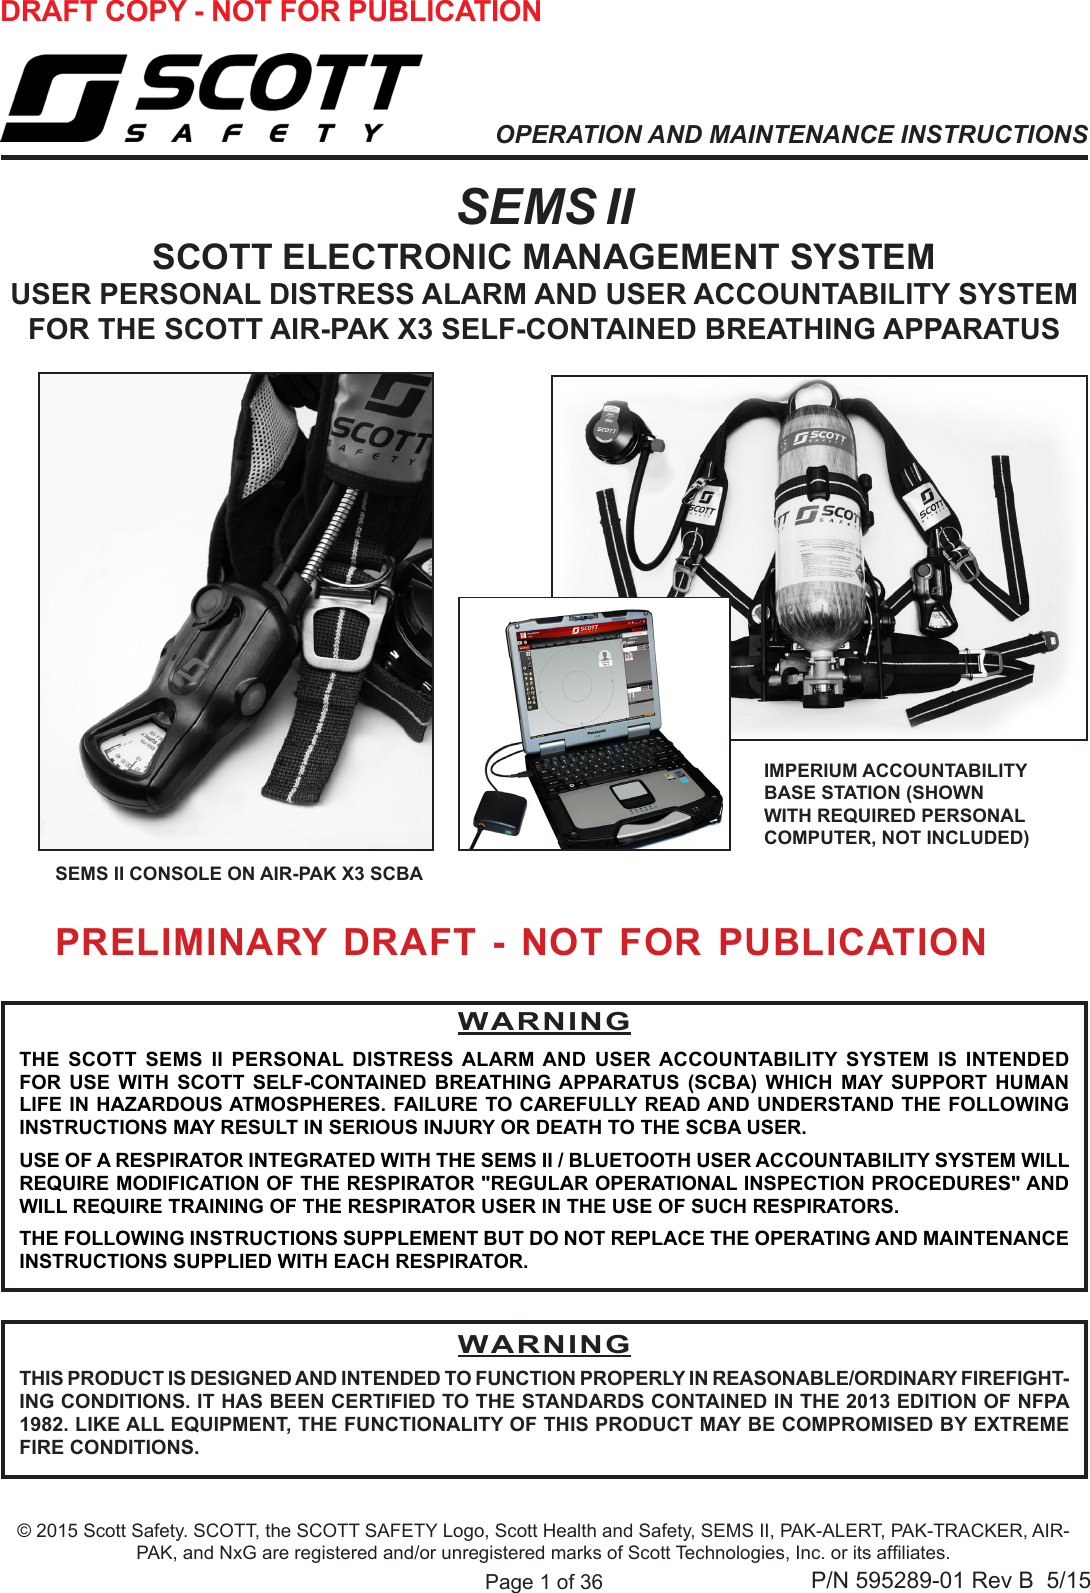 Page 1 of 36P/N 595289-01 Rev B  5/15OPERATION AND MAINTENANCE INSTRUCTIONSSEMS II SCOTT ELECTRONIC MANAGEMENT SYSTEMUSER PERSONAL DISTRESS ALARM AND USER ACCOUNTABILITY SYSTEM FOR THE SCOTT AIR-PAK X3 SELF-CONTAINED BREATHING APPARATUSSEMS II CONSOLE ON AIR-PAK X3 SCBAWARNINGTHE SCOTT SEMS II PERSONAL DISTRESS ALARM AND USER ACCOUNTABILITY SYSTEM IS INTENDED FOR USE WITH SCOTT SELF-CONTAINED BREATHING APPARATUS (SCBA) WHICH MAY SUPPORT HUMAN LIFE IN HAZARDOUS ATMOSPHERES. FAILURE TO CAREFULLY READ AND UNDERSTAND THE FOLLOWING INSTRUCTIONS MAY RESULT IN SERIOUS INJURY OR DEATH TO THE SCBA USER.USE OF A RESPIRATOR INTEGRATED WITH THE SEMS II / BLUETOOTH USER ACCOUNTABILITY SYSTEM WILL REQUIRE MODIFICATION OF THE RESPIRATOR &quot;REGULAR OPERATIONAL INSPECTION PROCEDURES&quot; AND WILL REQUIRE TRAINING OF THE RESPIRATOR USER IN THE USE OF SUCH RESPIRATORS.THE FOLLOWING INSTRUCTIONS SUPPLEMENT BUT DO NOT REPLACE THE OPERATING AND MAINTENANCE INSTRUCTIONS SUPPLIED WITH EACH RESPIRATOR.© 2015 Scott Safety. SCOTT, the SCOTT SAFETY Logo, Scott Health and Safety, SEMS II, PAK-ALERT, PAK-TRACKER, AIR-PAK, and NxG are registered and/or unregistered marks of Scott Technologies, Inc. or its afliates.DRAFT COPY - NOT FOR PUBLICATION IMPERIUM ACCOUNTABILITY BASE STATION (SHOWN  WITH REQUIRED PERSONAL  COMPUTER, NOT INCLUDED)WARNINGTHIS PRODUCT IS DESIGNED AND INTENDED TO FUNCTION PROPERLY IN REASONABLE/ORDINARY FIREFIGHT-ING CONDITIONS. IT HAS BEEN CERTIFIED TO THE STANDARDS CONTAINED IN THE 2013 EDITION OF NFPA 1982. LIKE ALL EQUIPMENT, THE FUNCTIONALITY OF THIS PRODUCT MAY BE COMPROMISED BY EXTREME FIRE CONDITIONS.PRELIMINARY DRAFT - NOT FOR PUBLICATION 